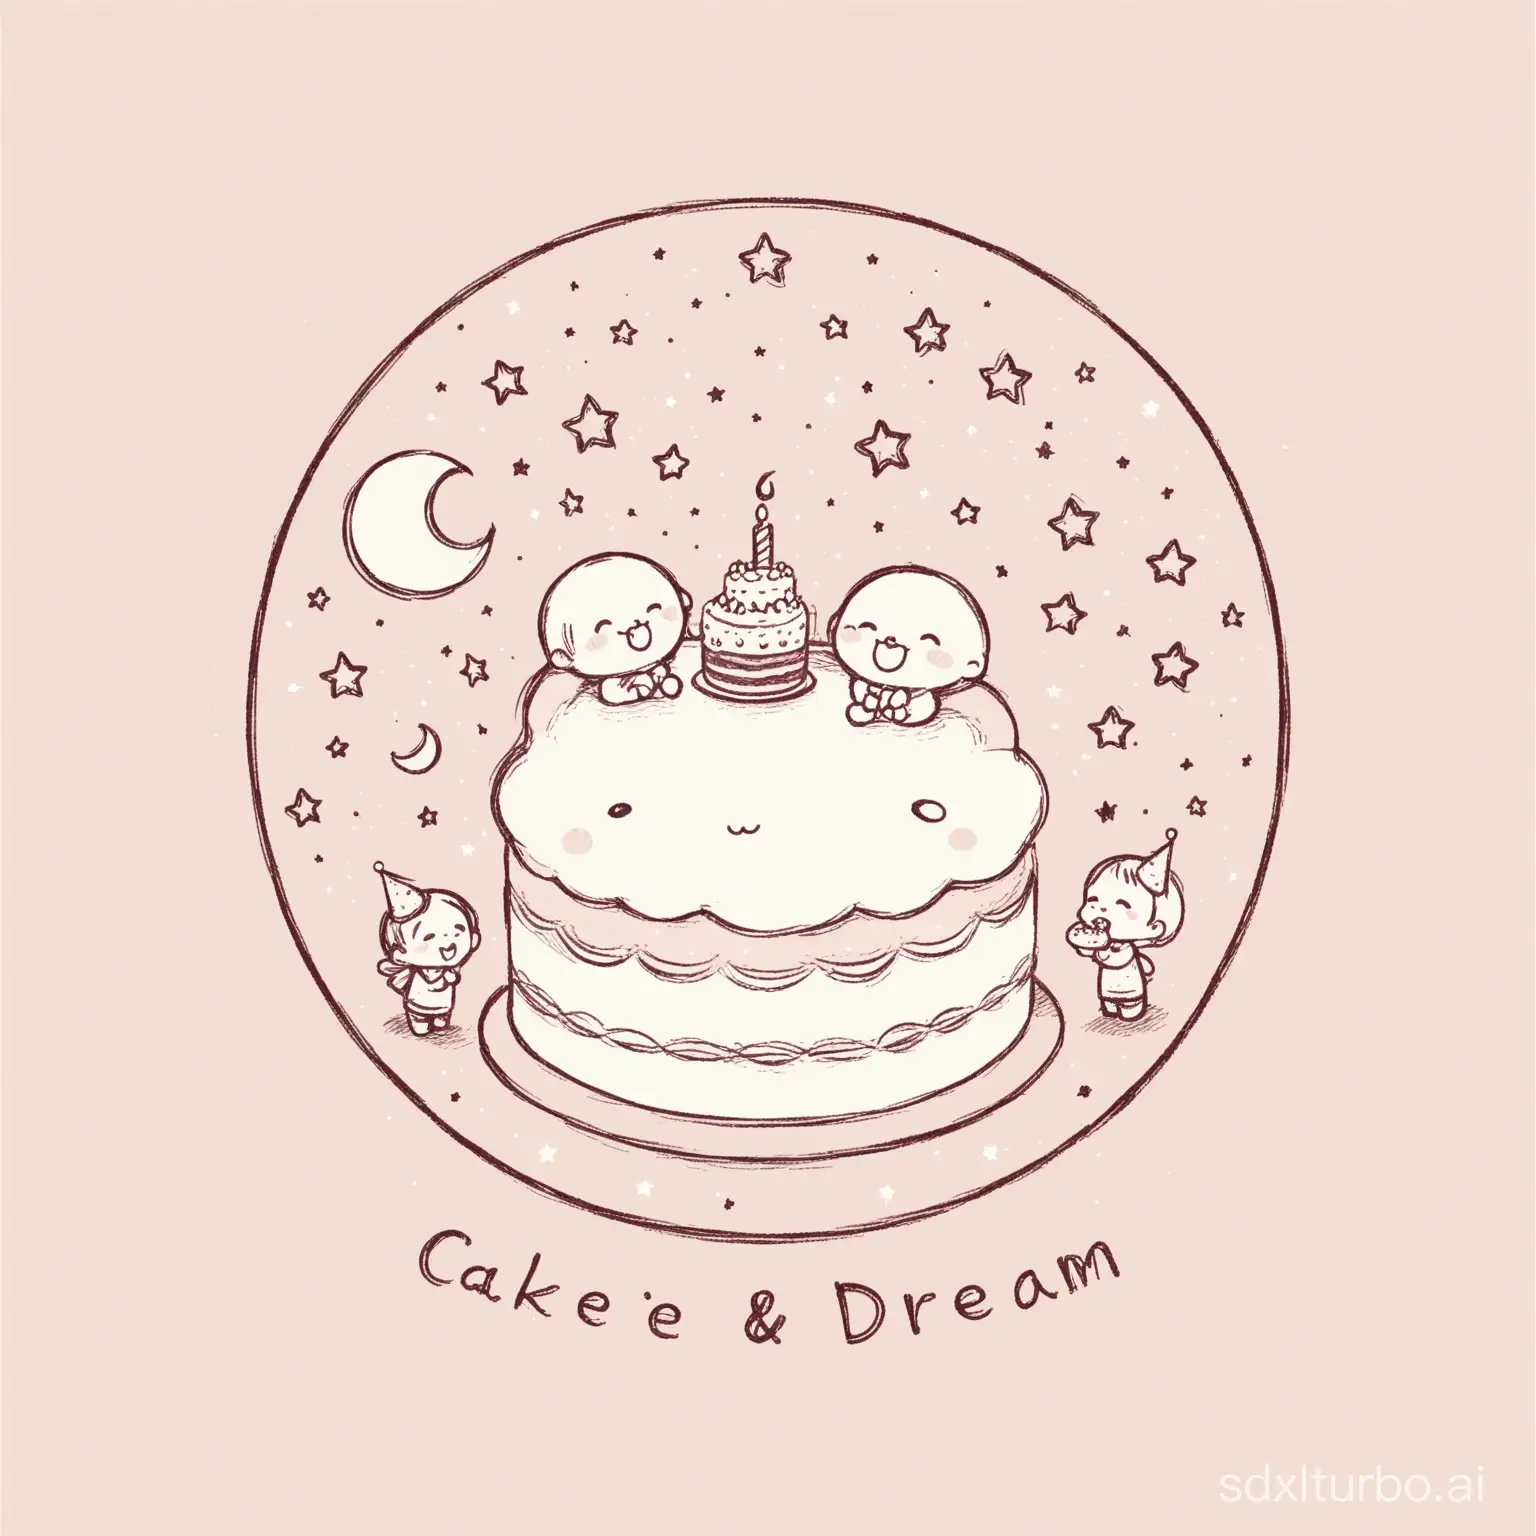 Dreamy-Starlit-Wishes-Simple-BlackandWhite-Logo-for-a-Cake-Shop